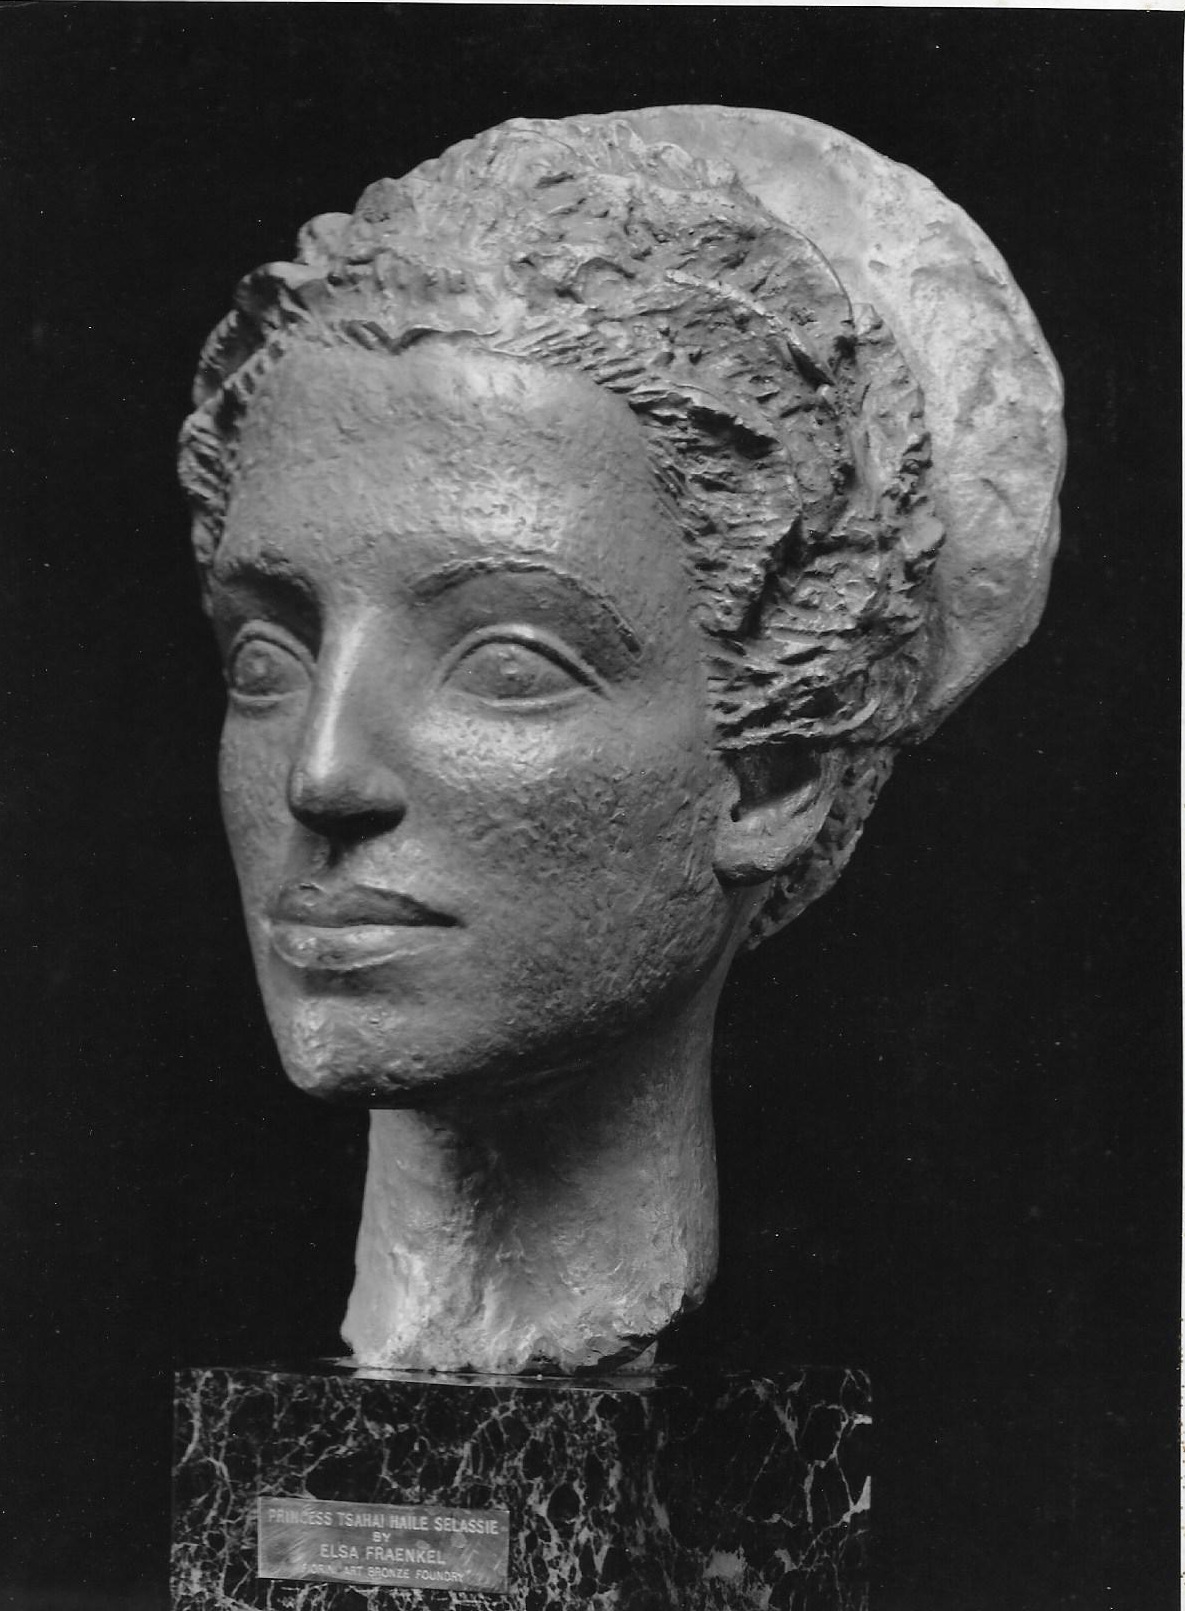 Princess Tsahai, Her Highness - Daughter of the late Emperor Haile Selassie of Ethiopia, bronze, 1953 